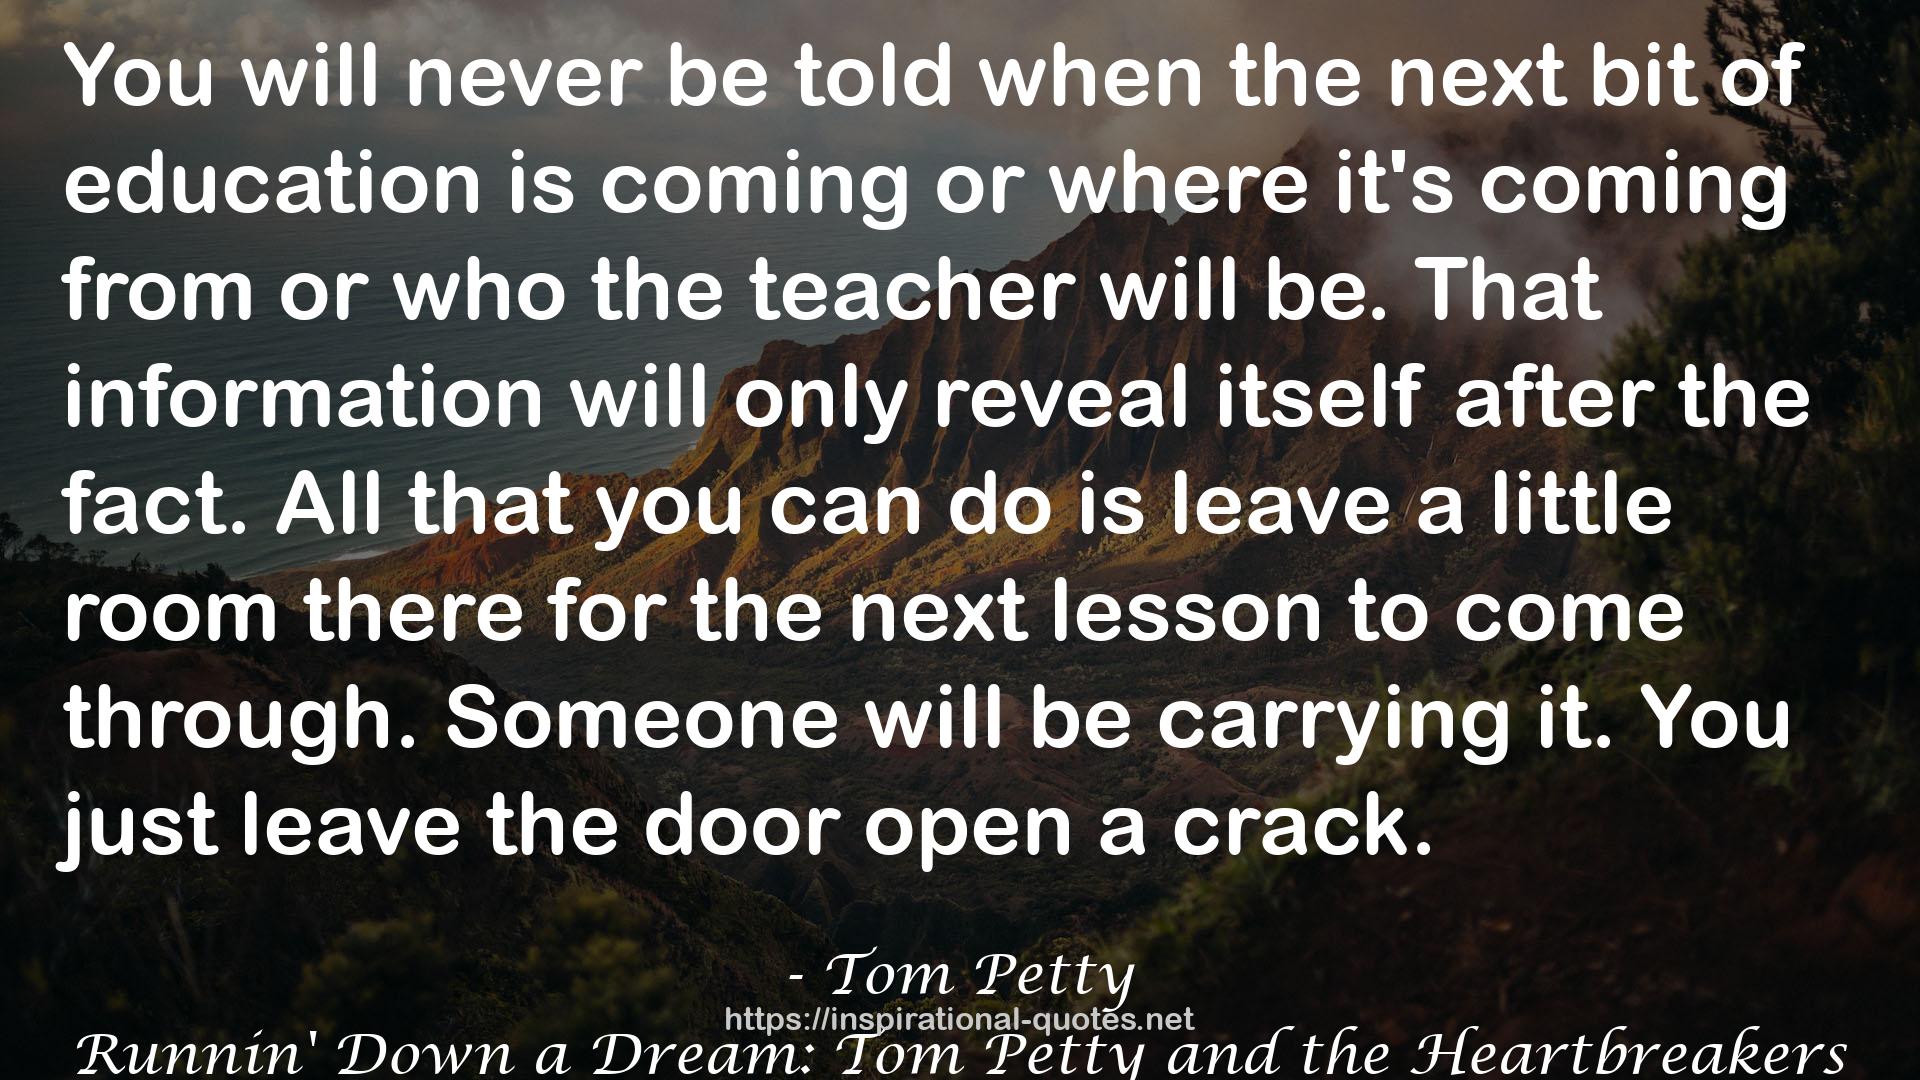 Runnin' Down a Dream: Tom Petty and the Heartbreakers QUOTES